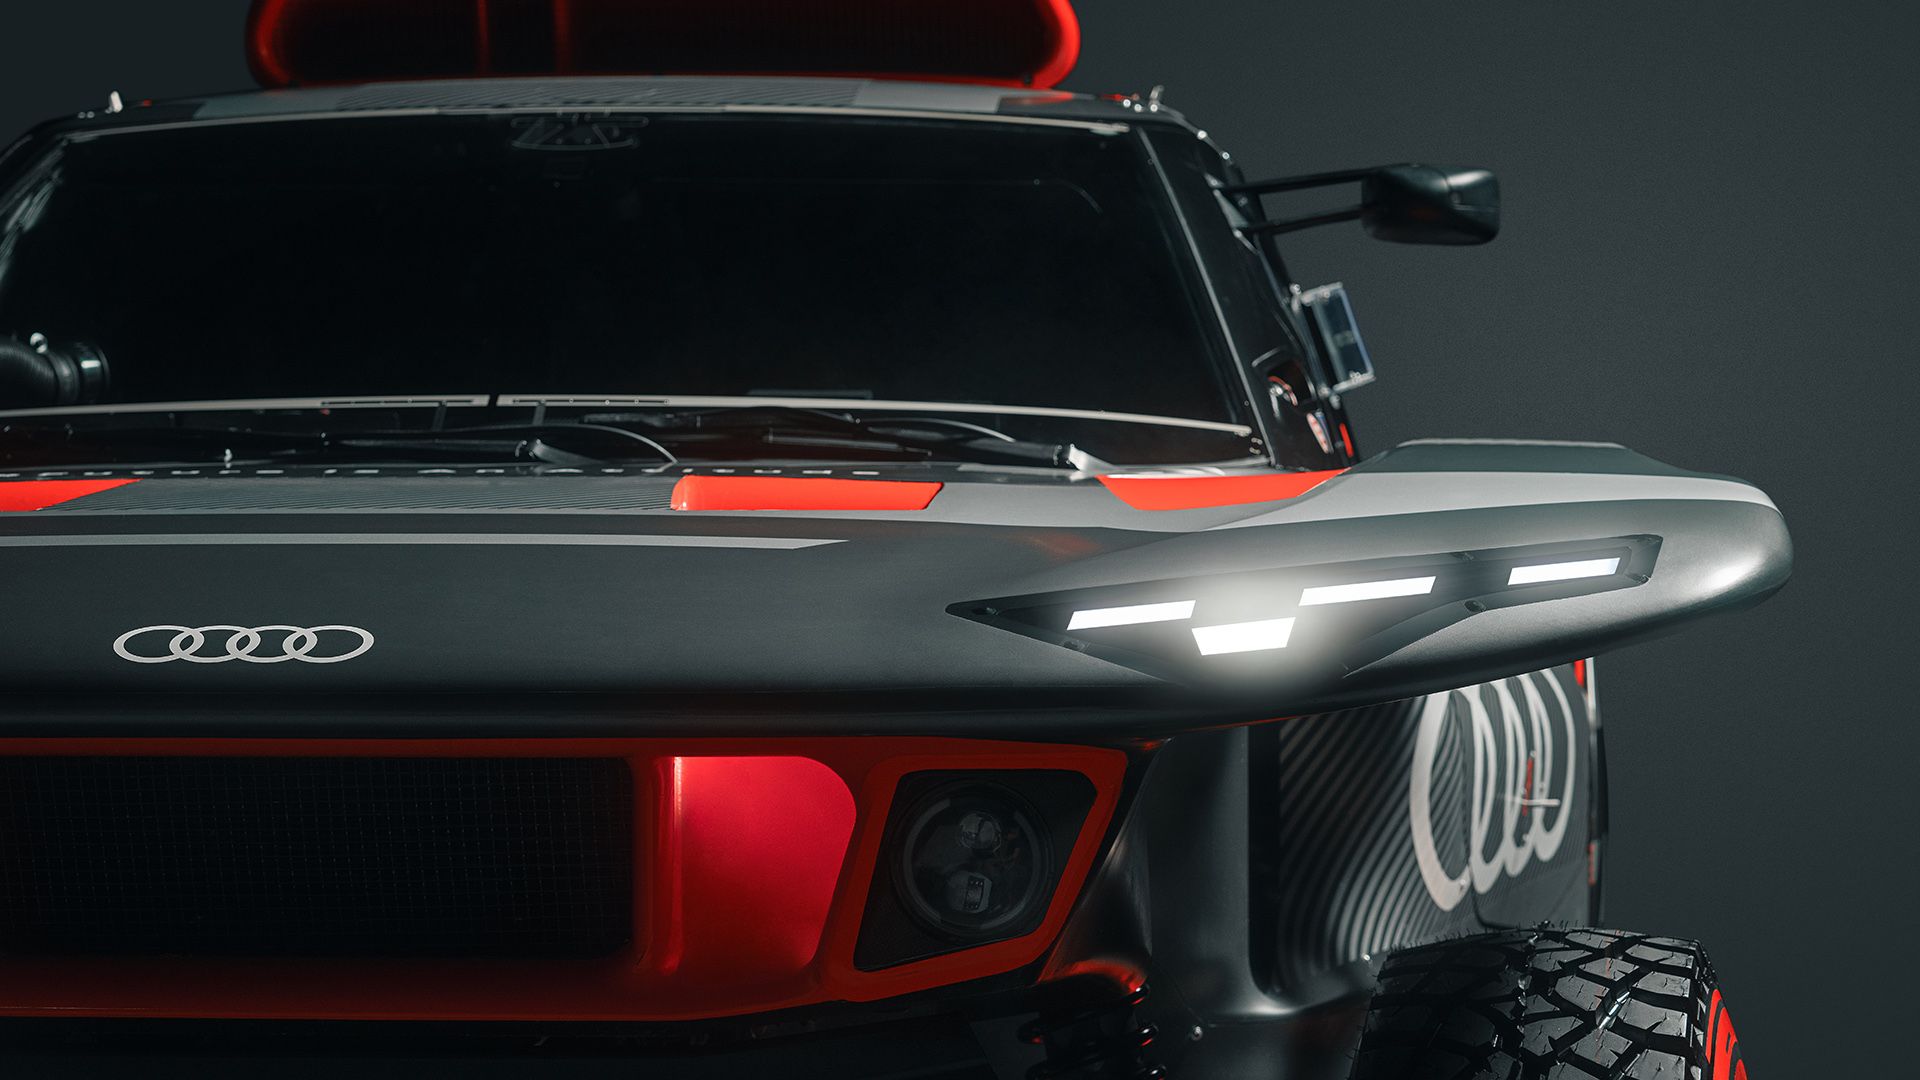 Close-up of the front headlights of the Audi RS Q e-tron.